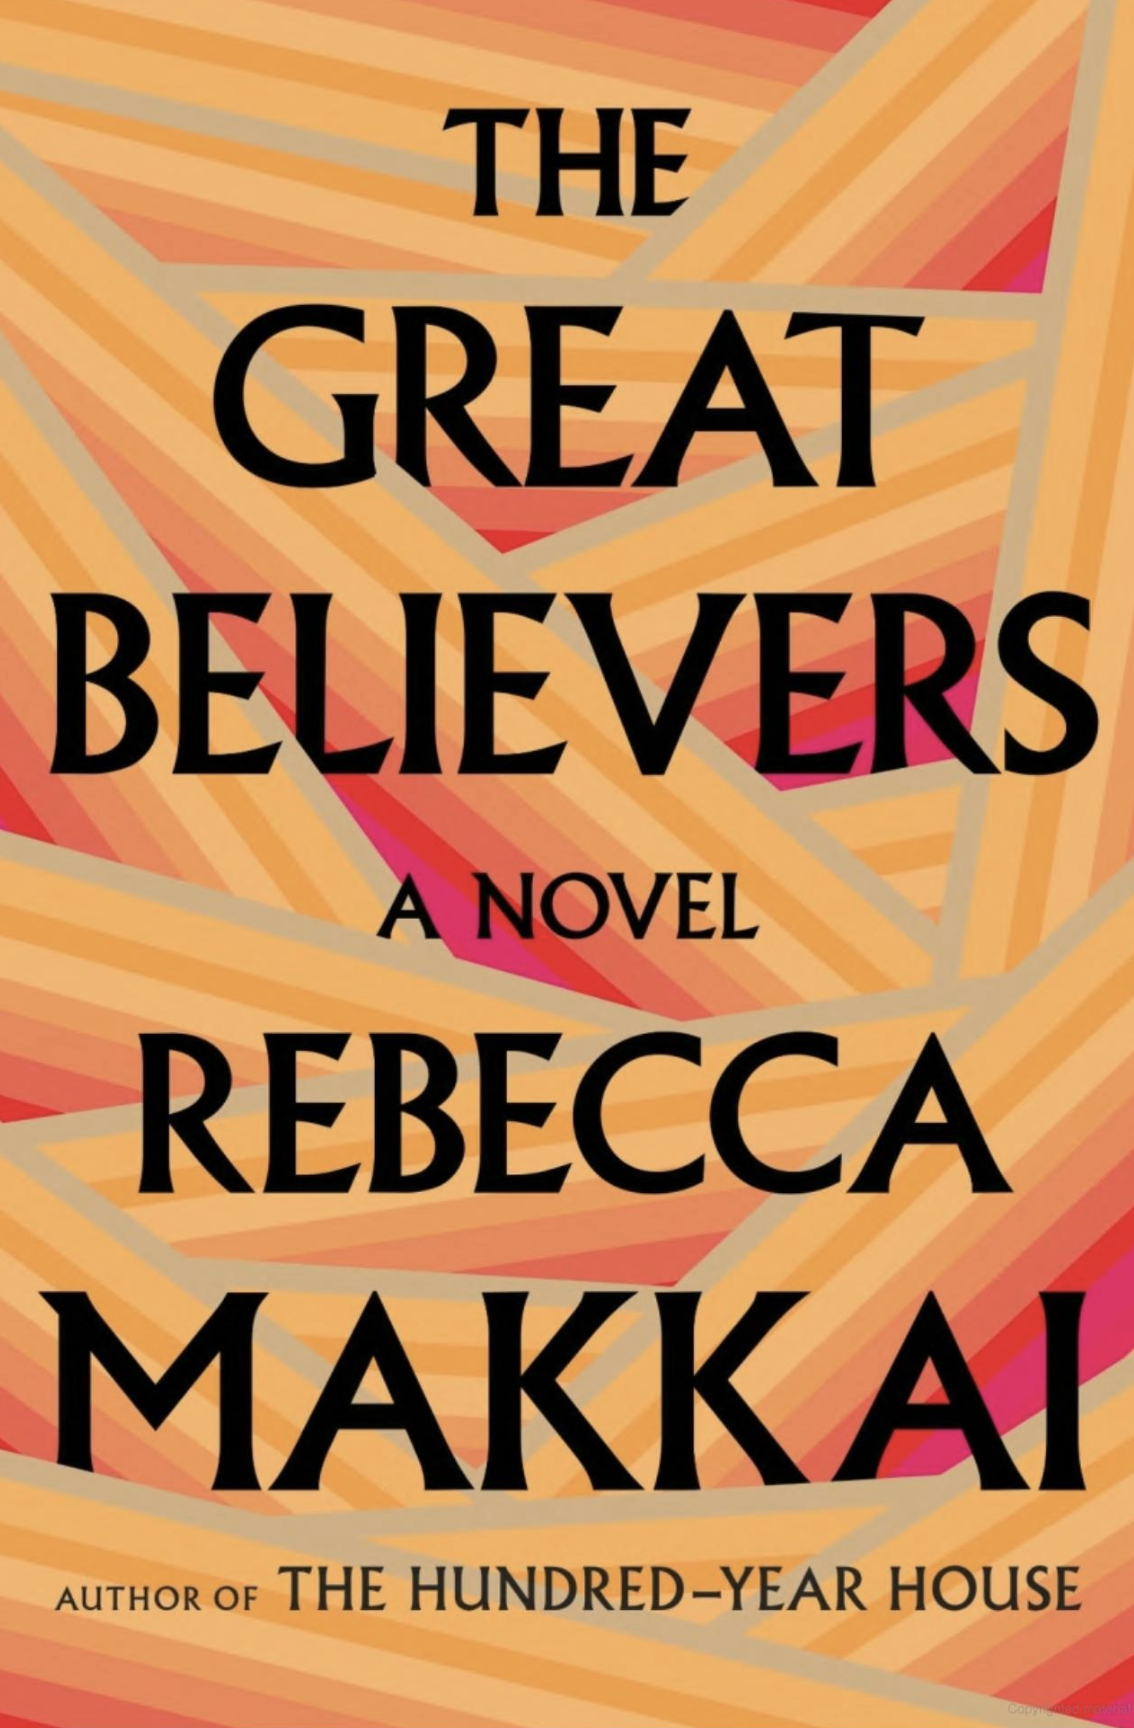 The Great Believers book cover